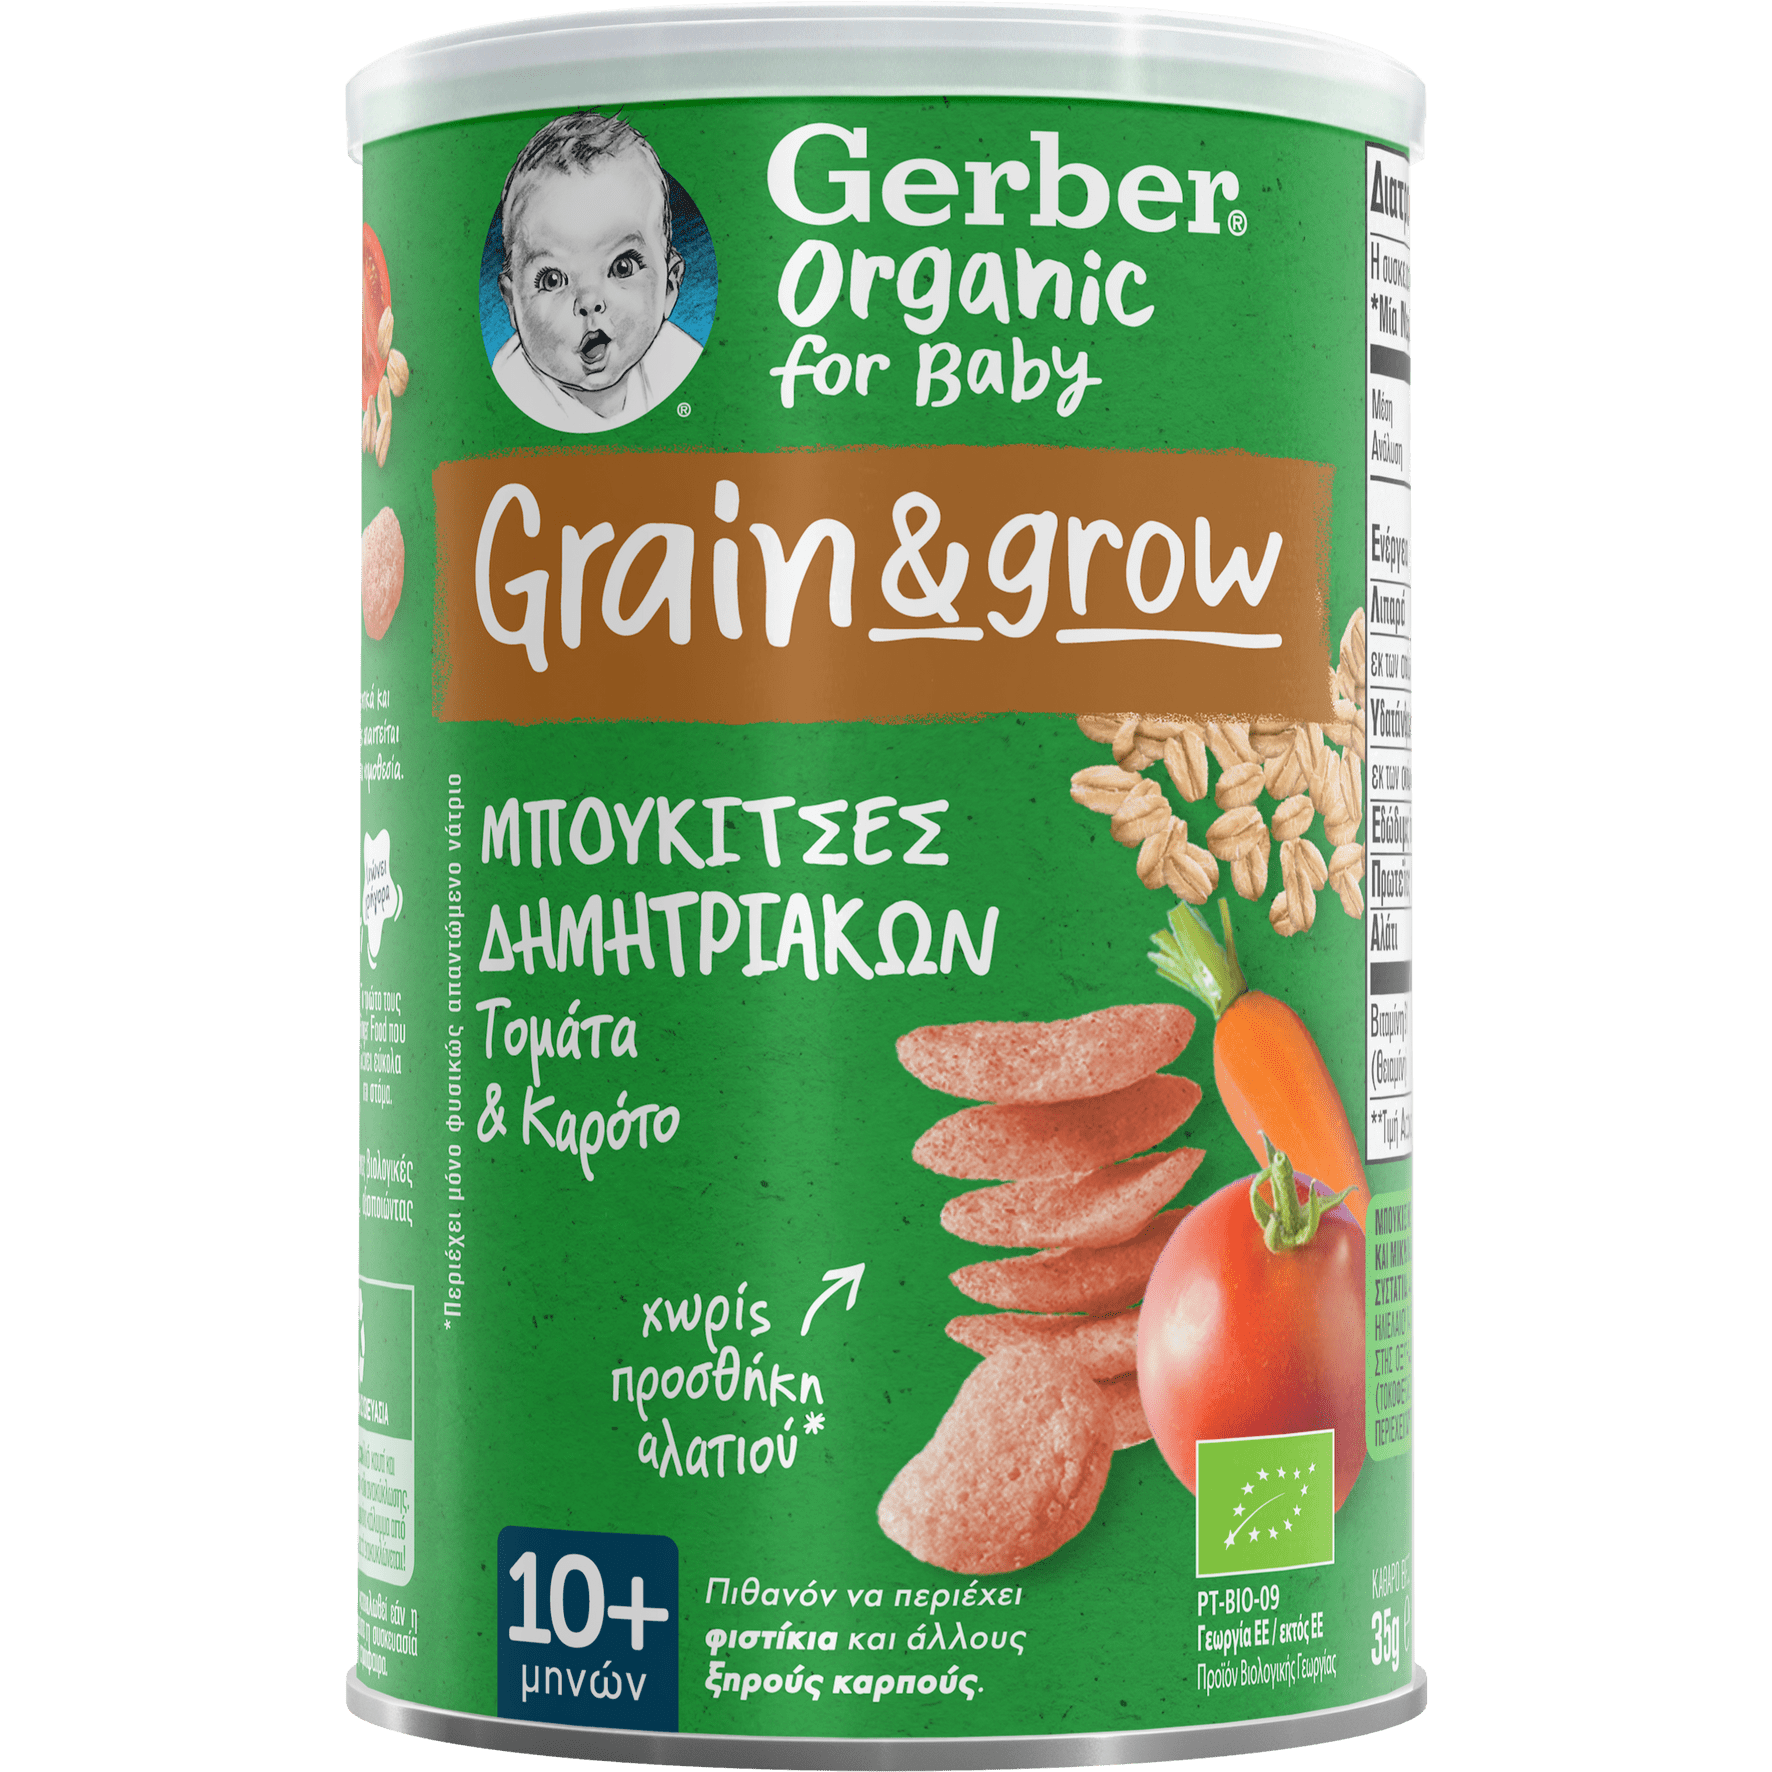 Grain & Grow Cereal Bites with Tomato & Carrot Flavor